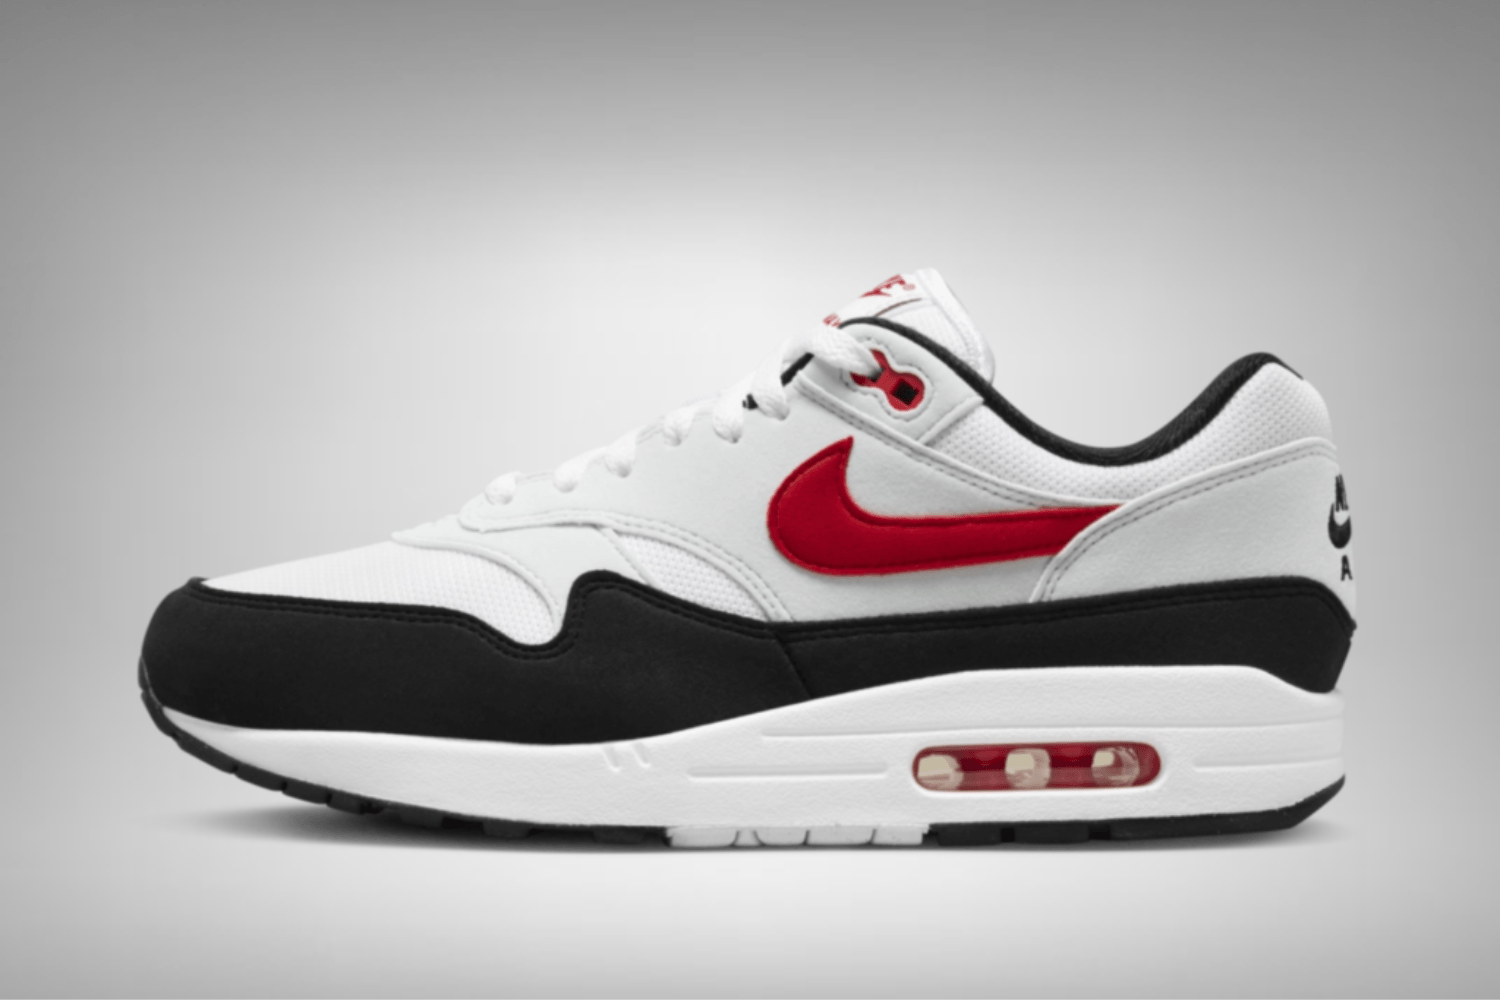 Nike Air Max 1 'Chili' gets oficial images - 2023